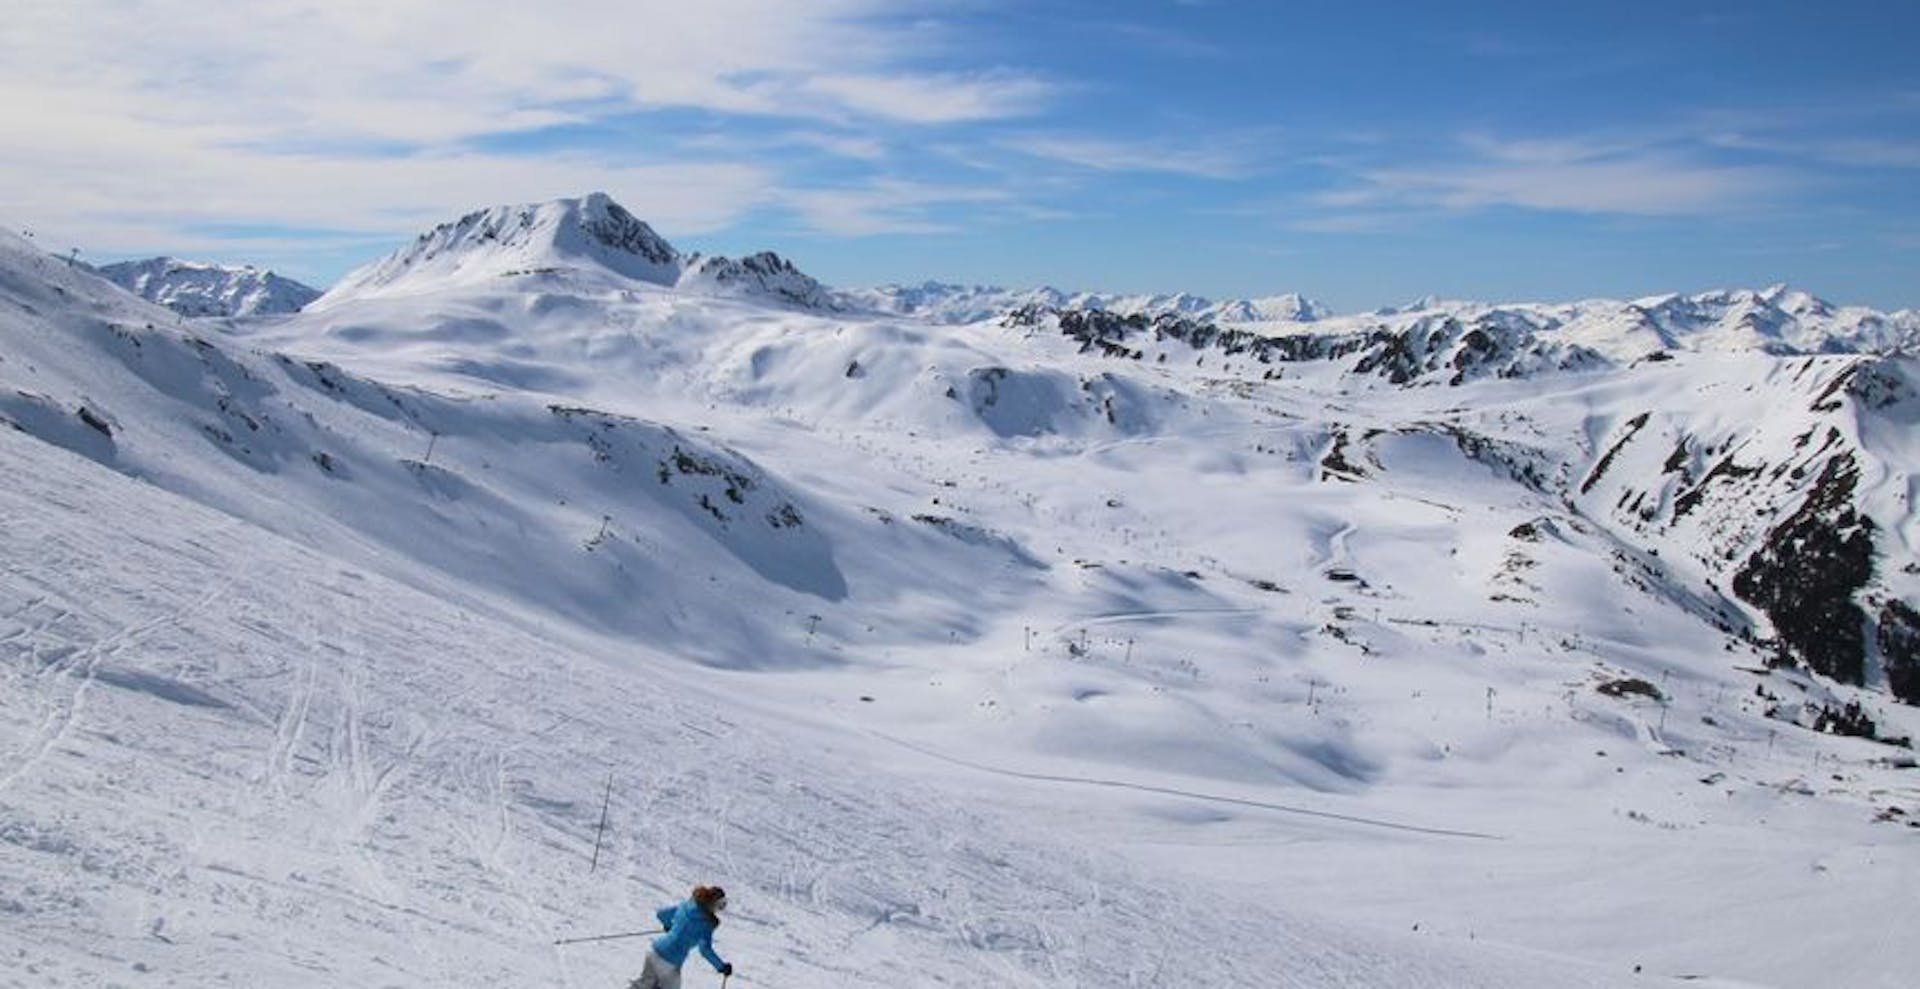 Skiing throughout Les Arcs is easy with a few key lifts to take you from one end to the other